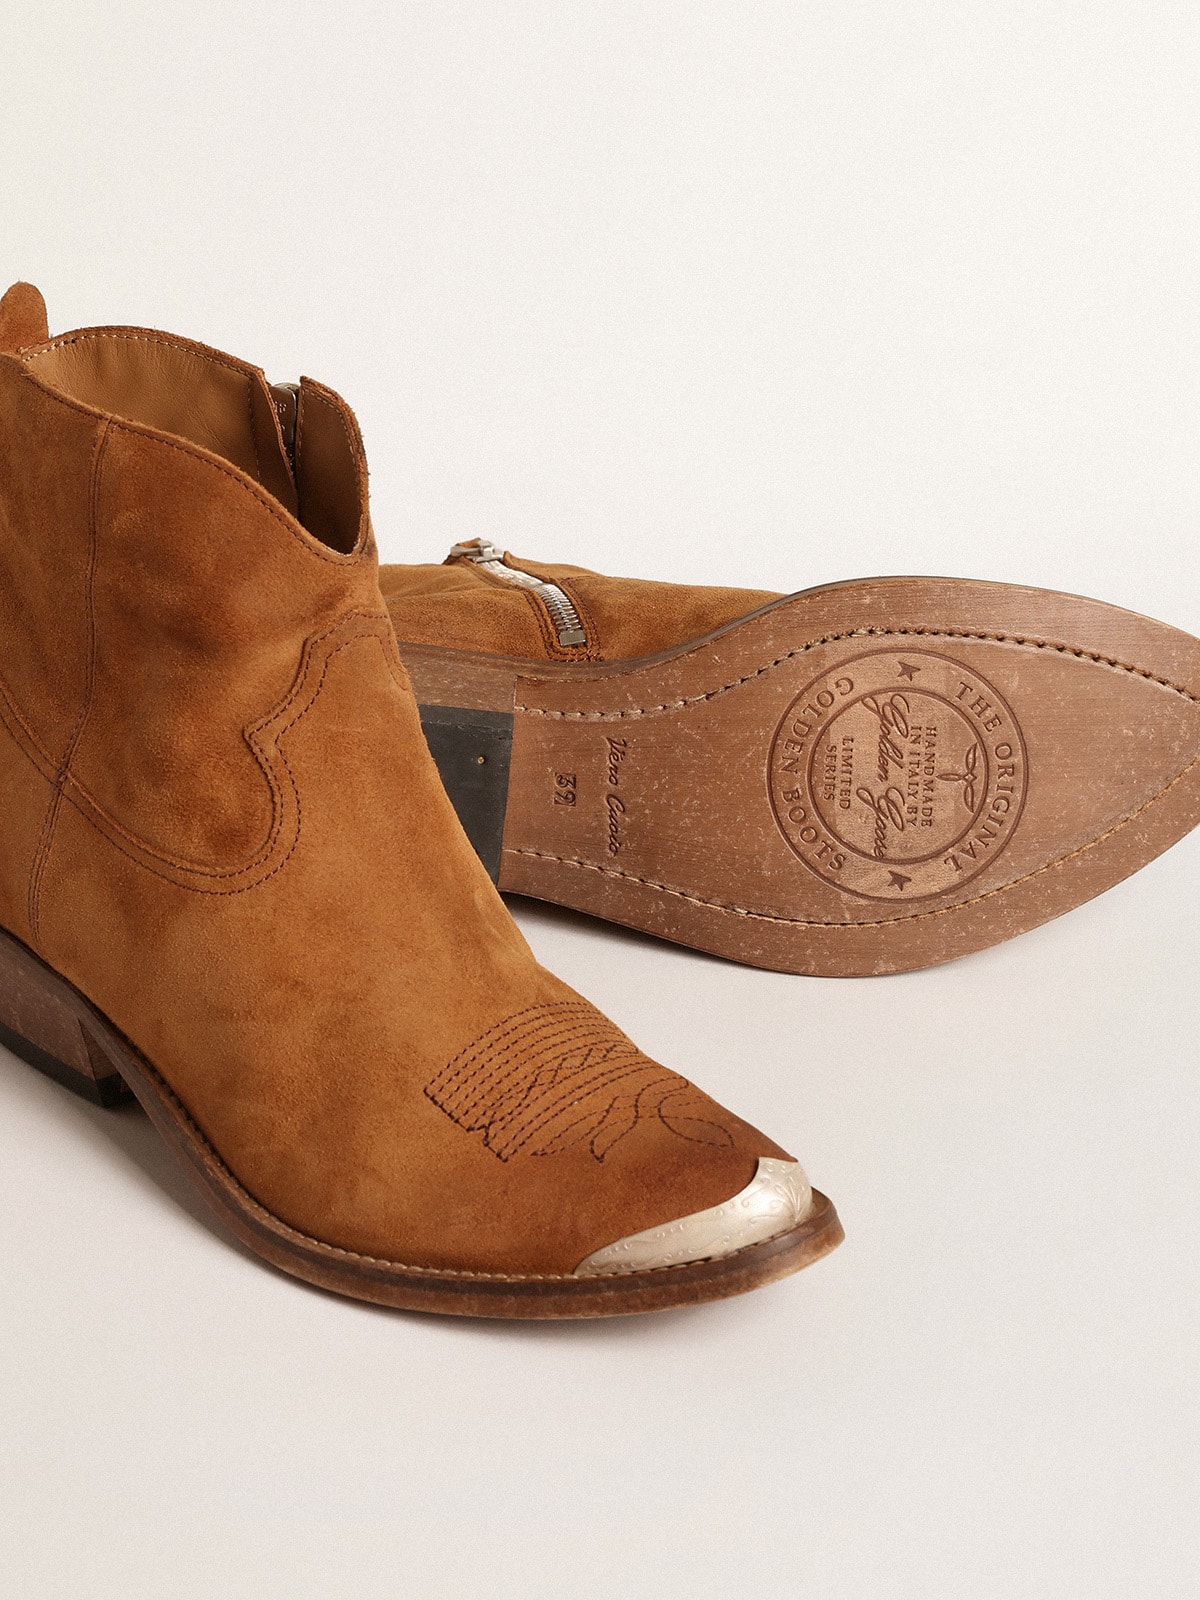 Young ankle boots in cognac-colored suede